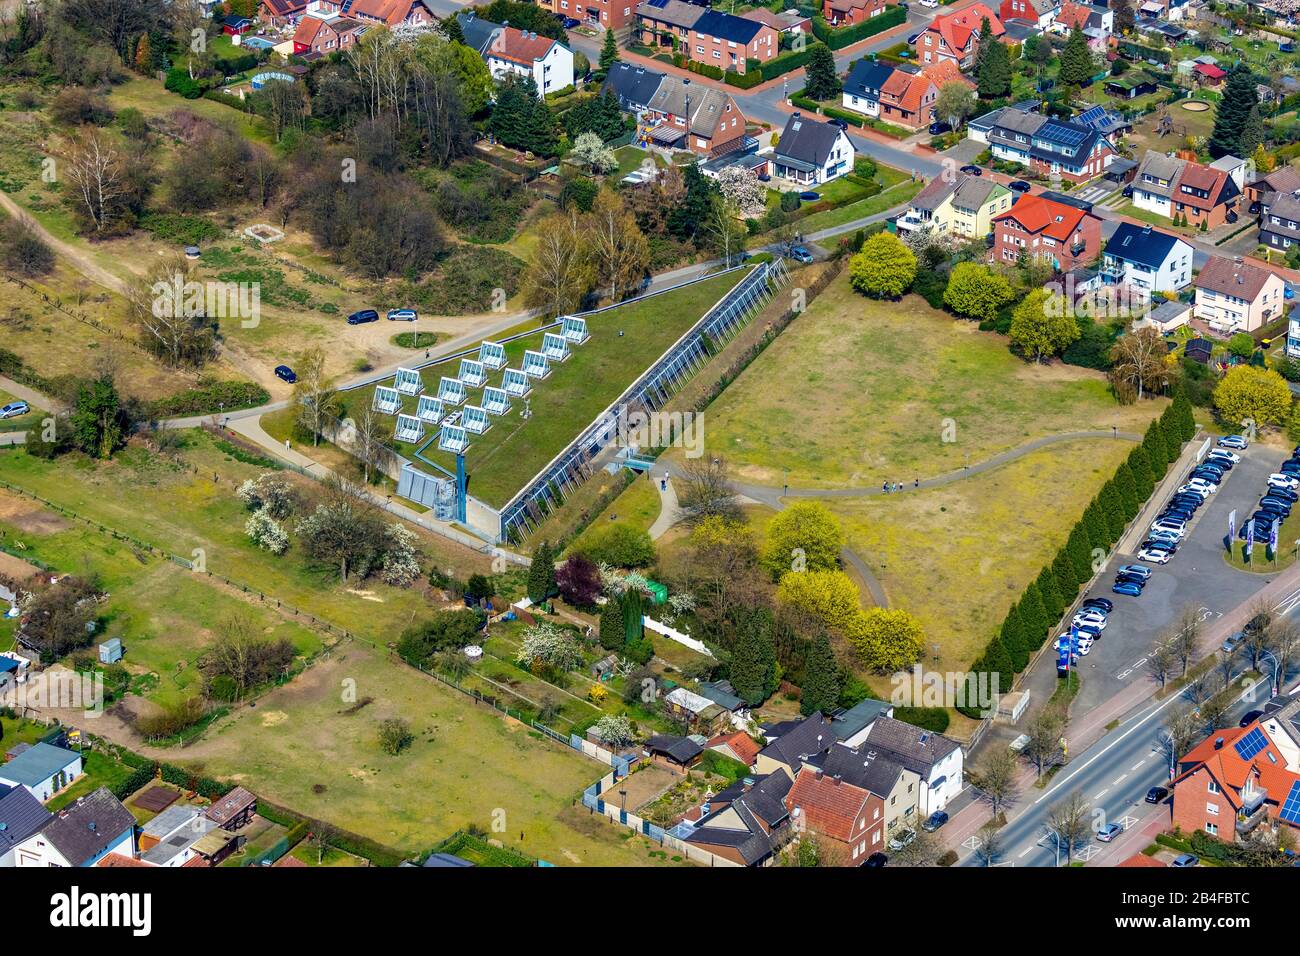 Aerial view of the LWL Römermuseum with reconstruction of a Roman camp - possibly right bank of the Rhine military base ALISO - in Haltern am See in the Ruhr area in the state of North Rhine-Westphalia, Germany. Stock Photo